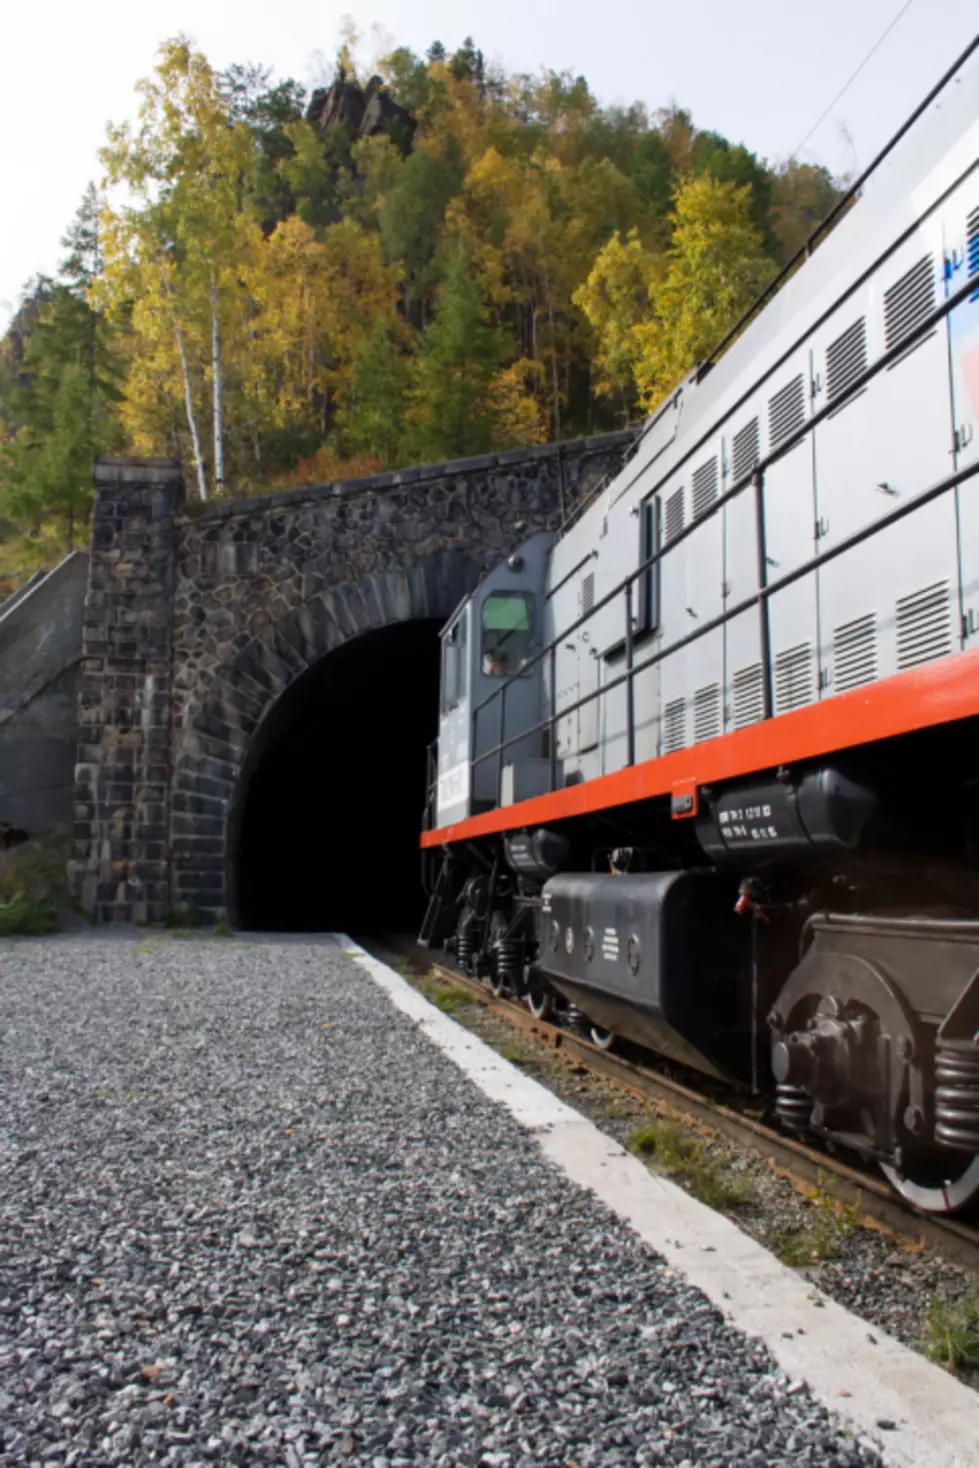 Hoosac Tunnel Open  After Partial Collapse In February